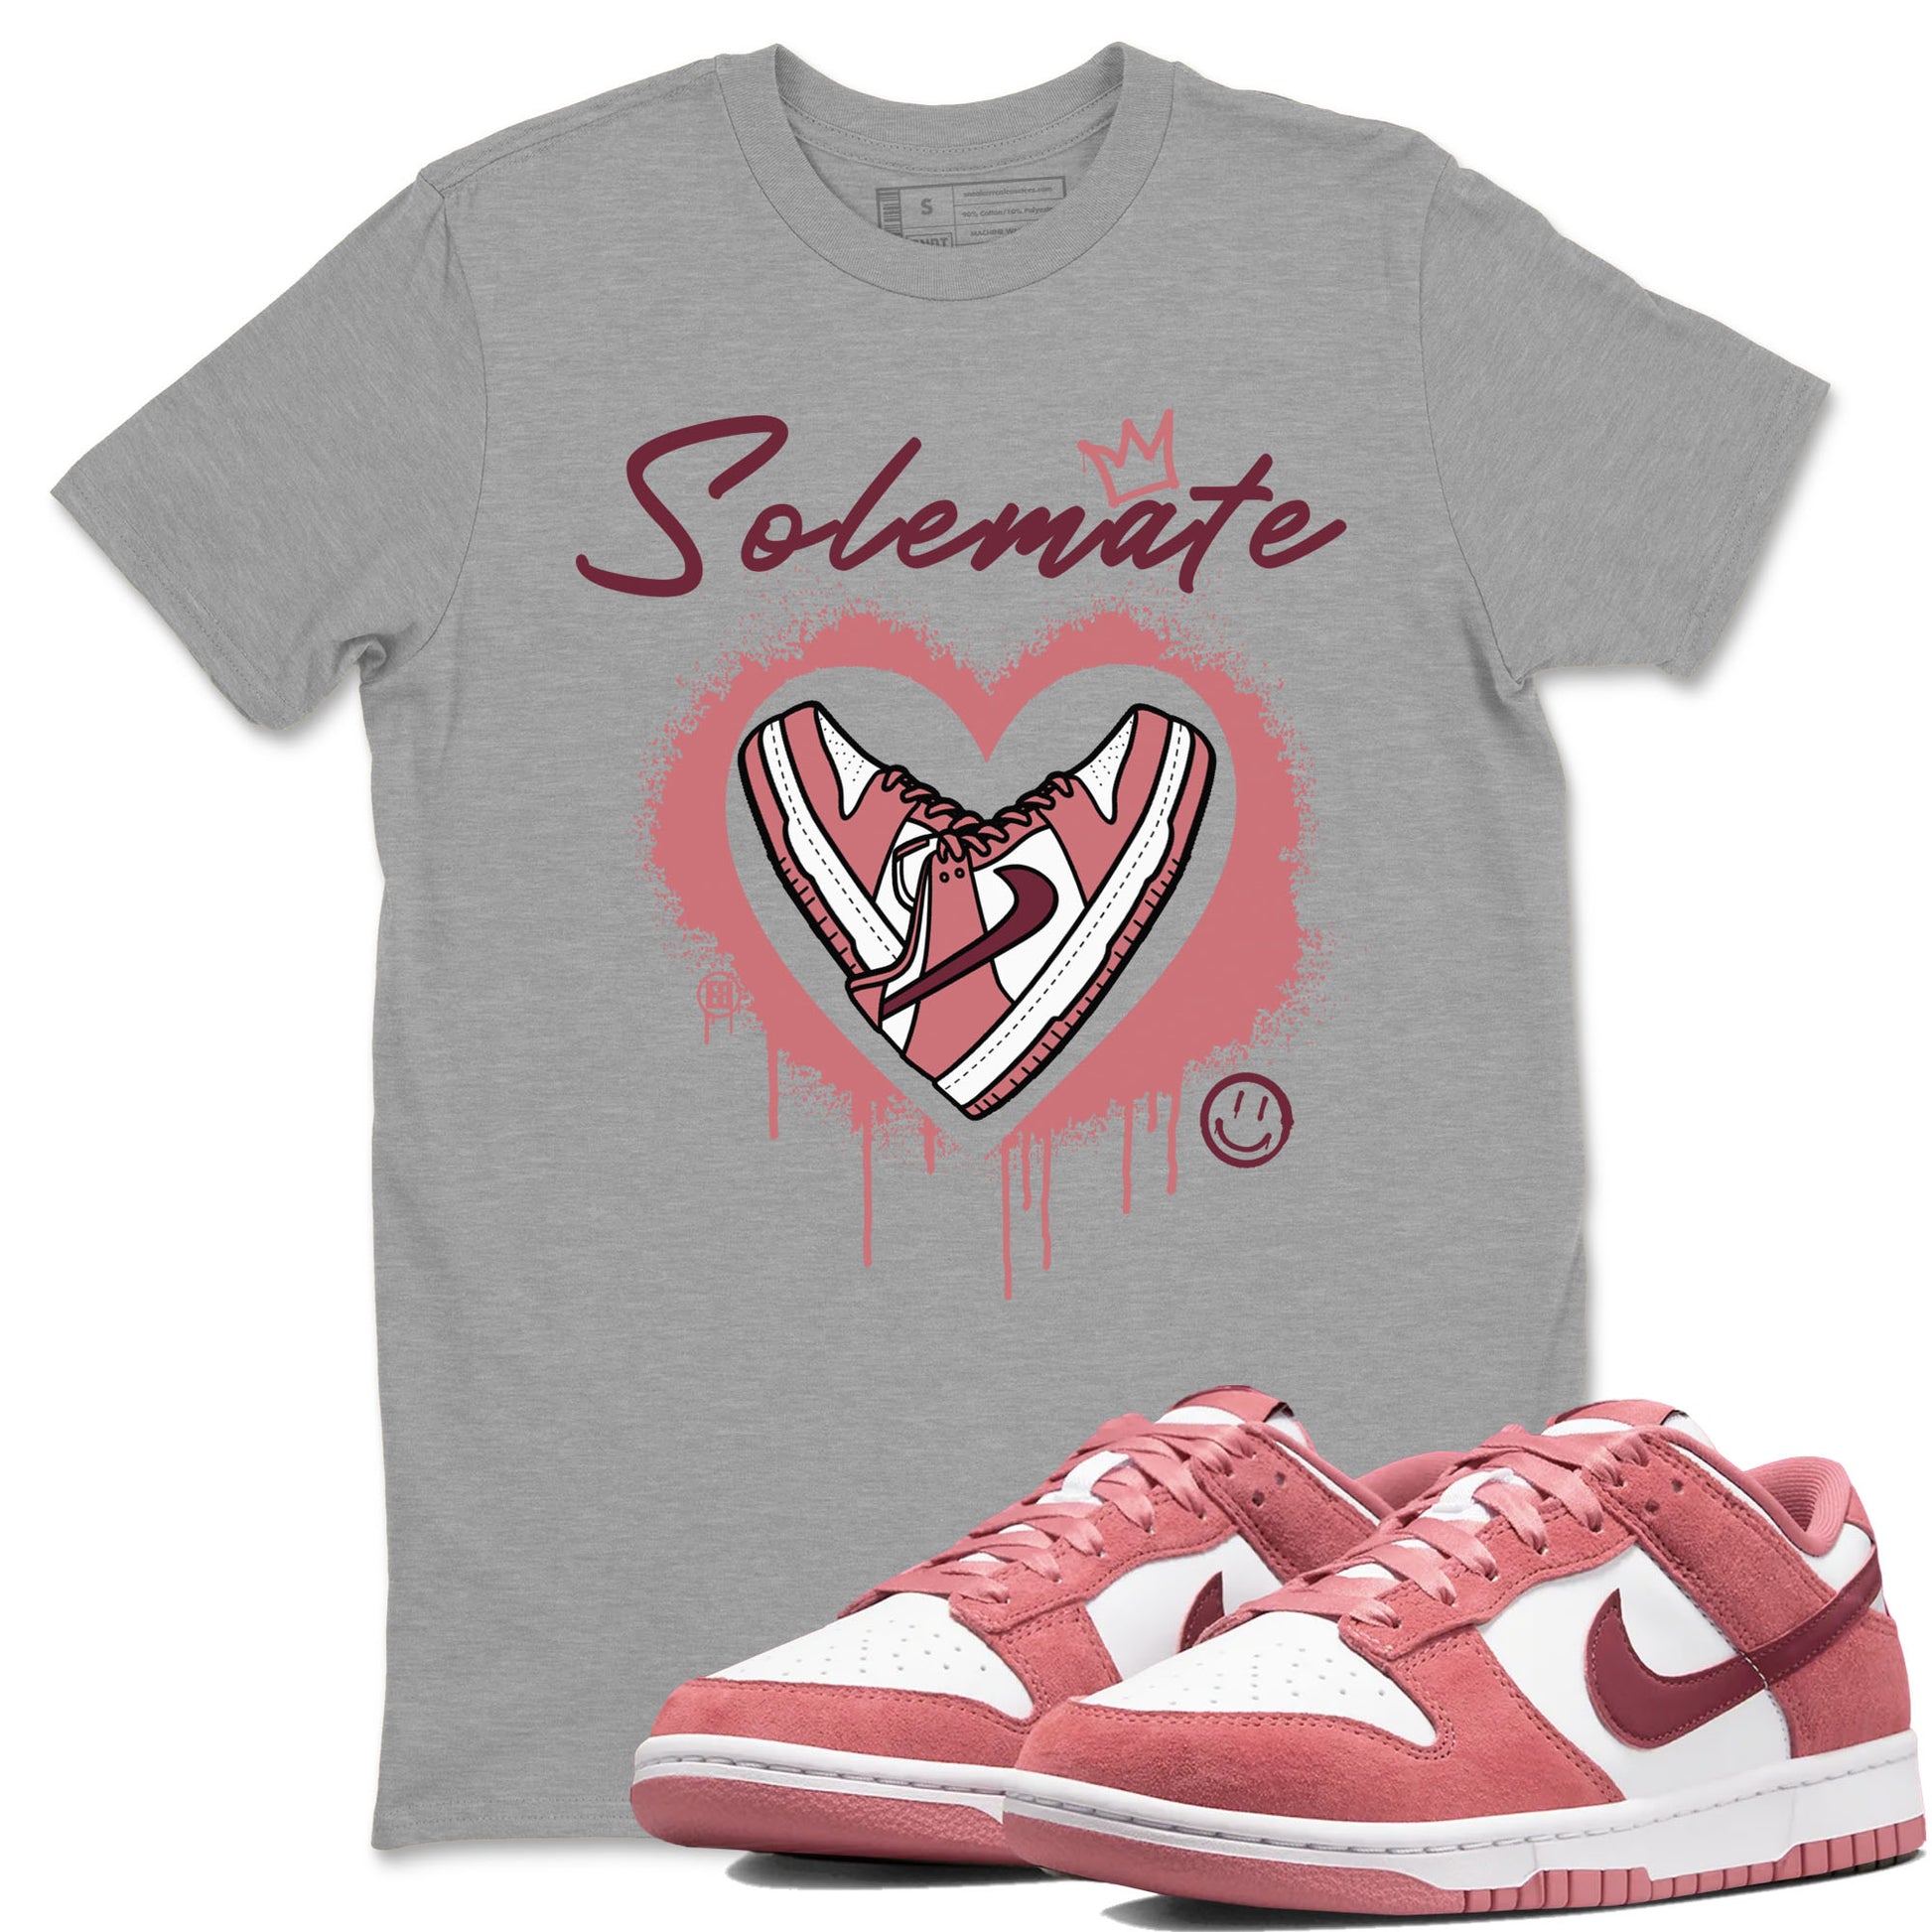 Solemate sneaker match tees to Dunk Valentine's Day street fashion brand for shirts to match Jordans SNRT Sneaker Tees Dunk Valentine's Day unisex t-shirt Heather Grey 1 unisex shirt